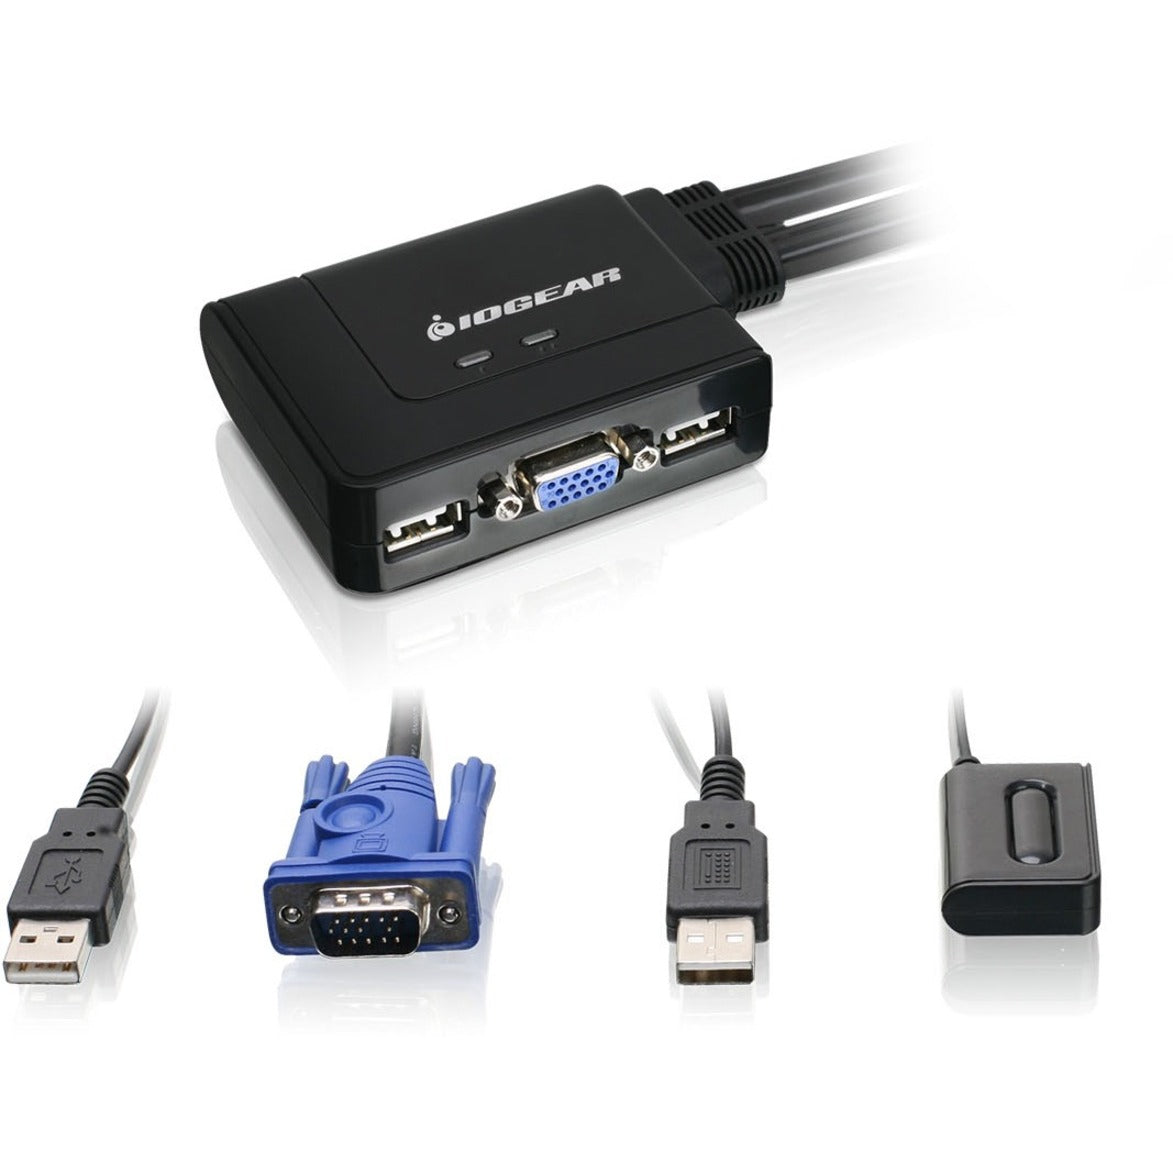 IOGEAR GCS22U 2-Port USB KVM Switch, Easy Computer Control for Home or Office